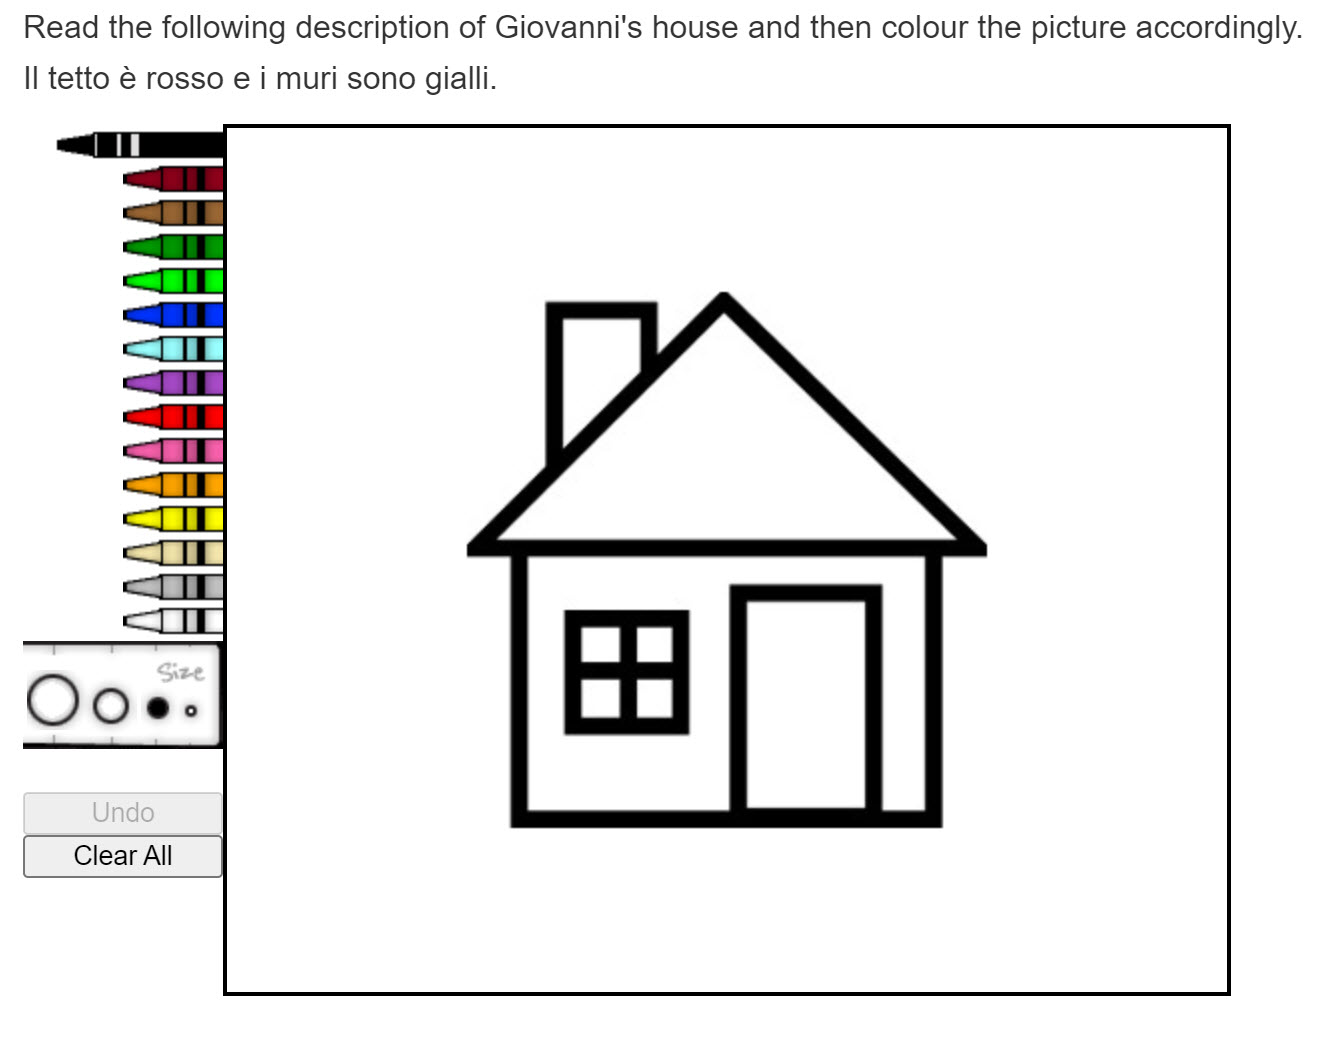 A drawing of a house with an Italian statement and instructions to color the house accordingly